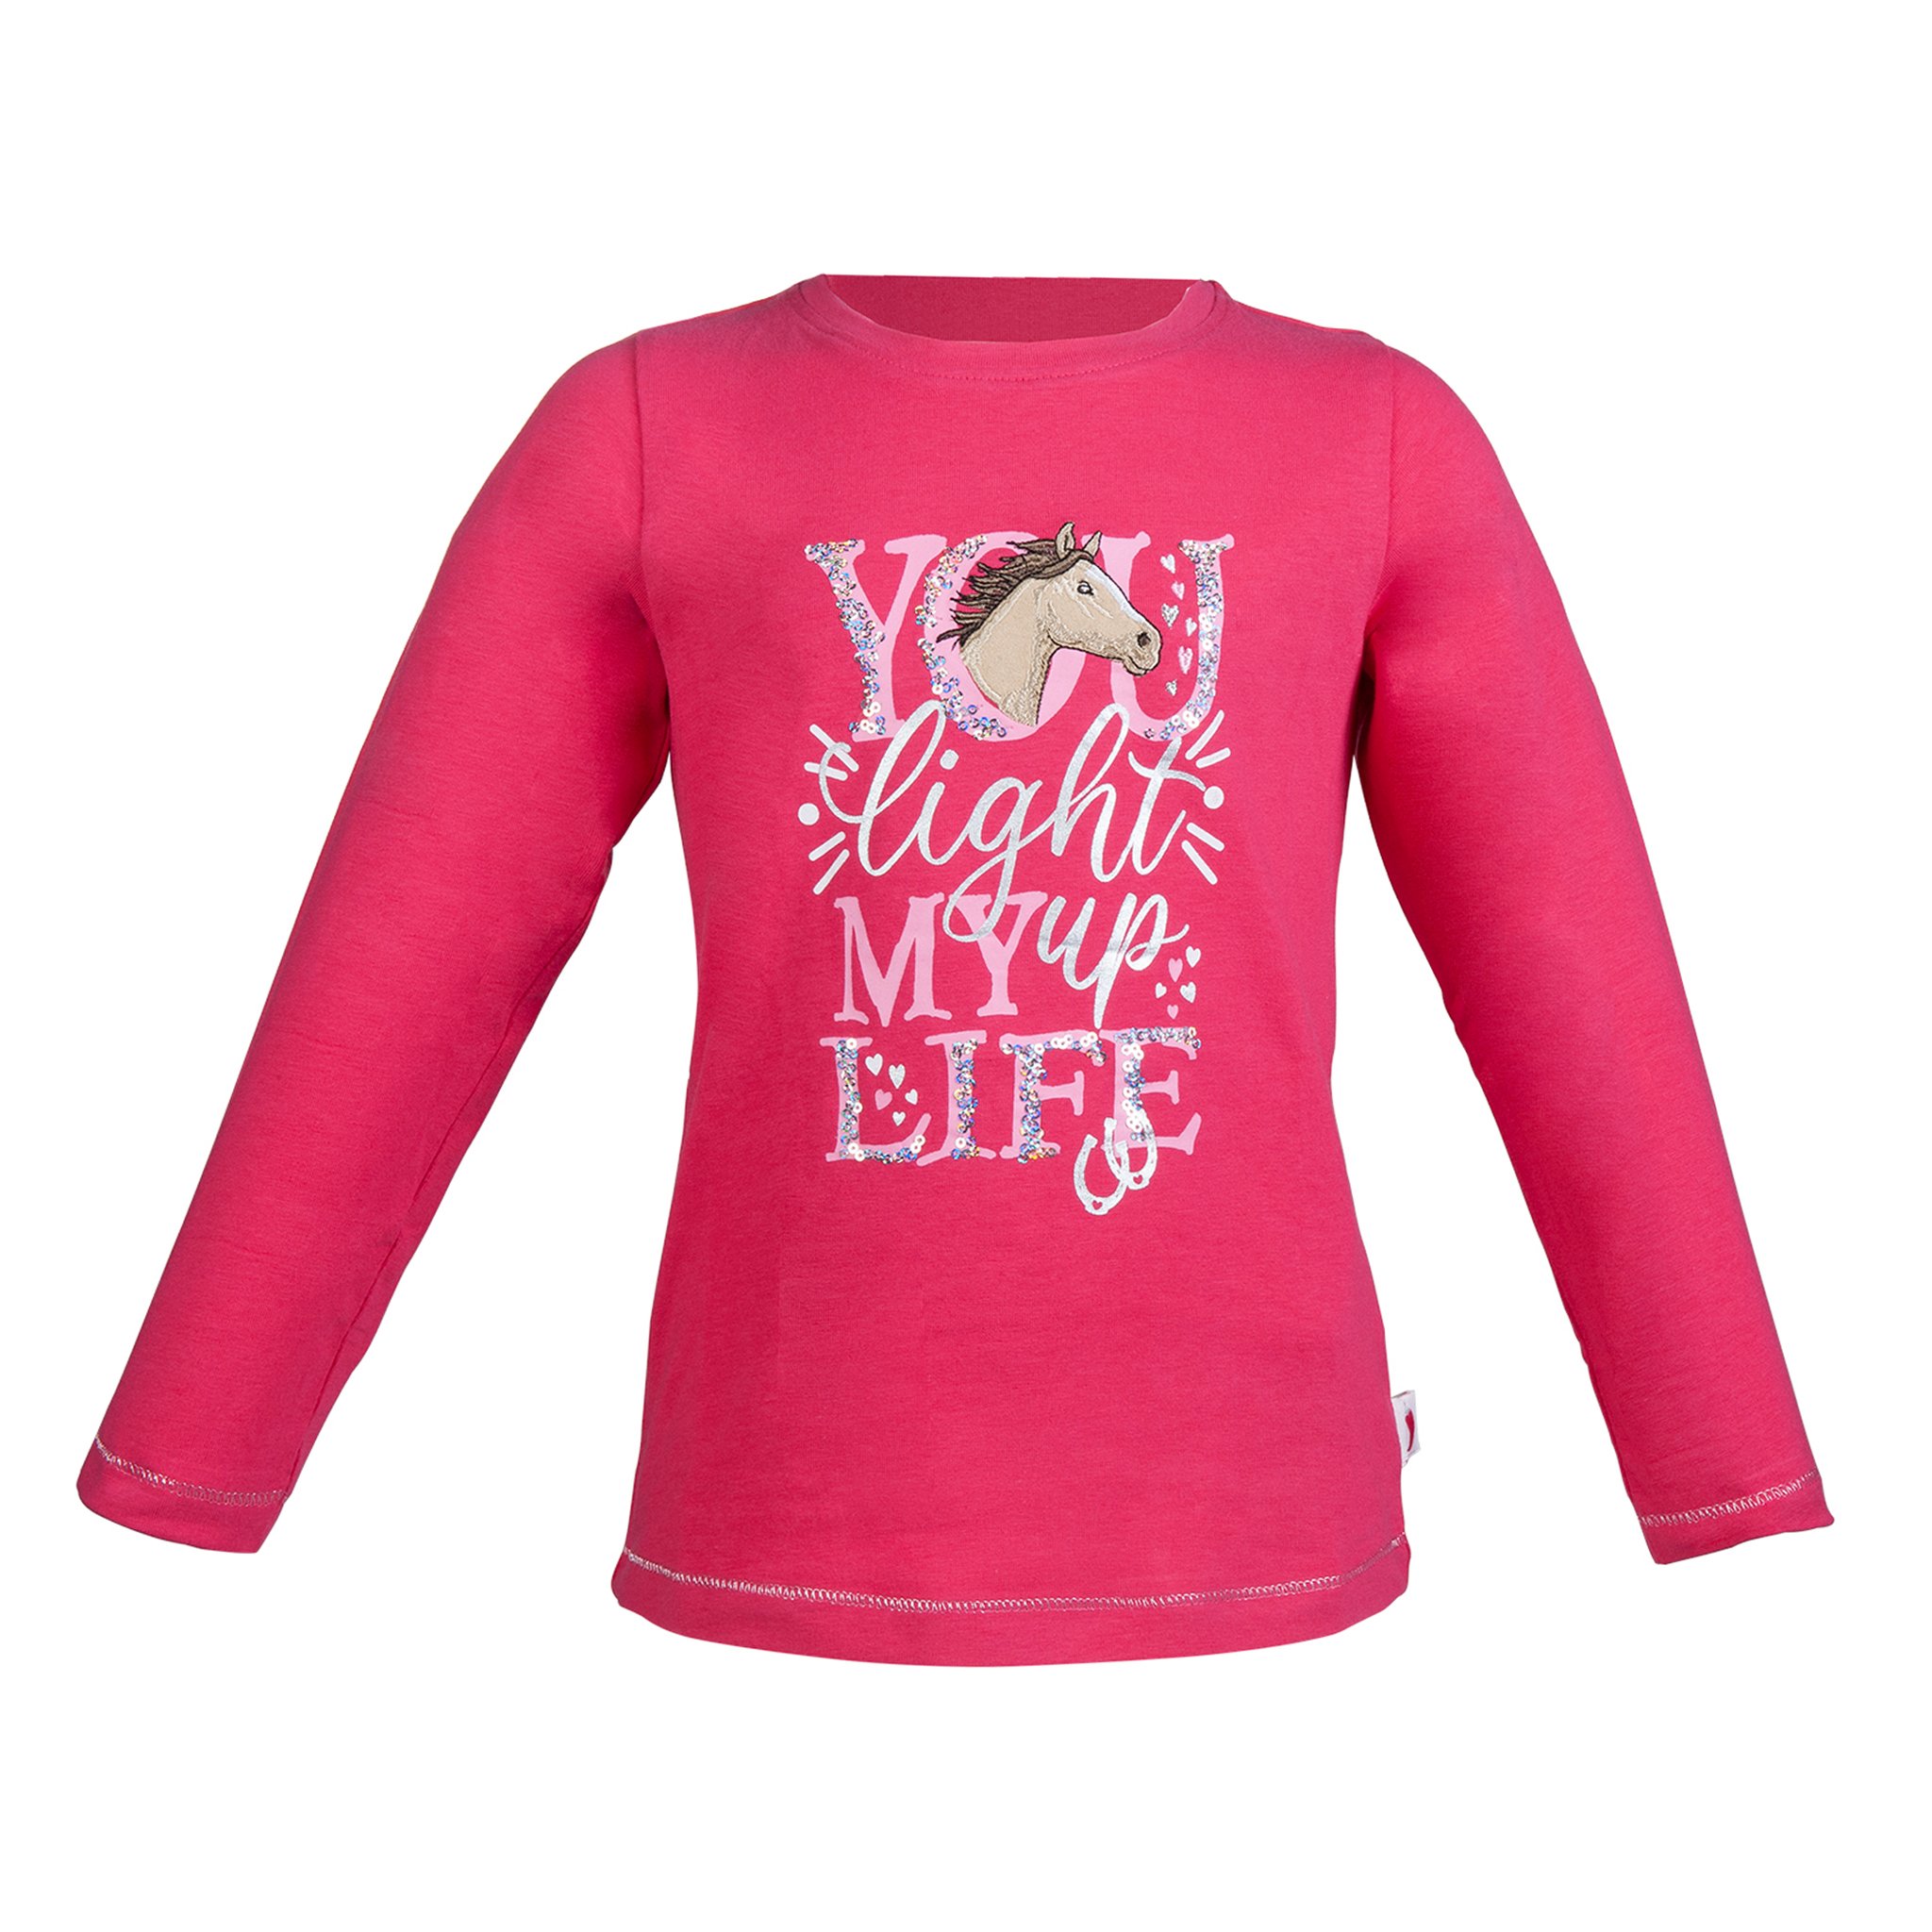 HKM Horse Love Long Sleeve Pink Top 